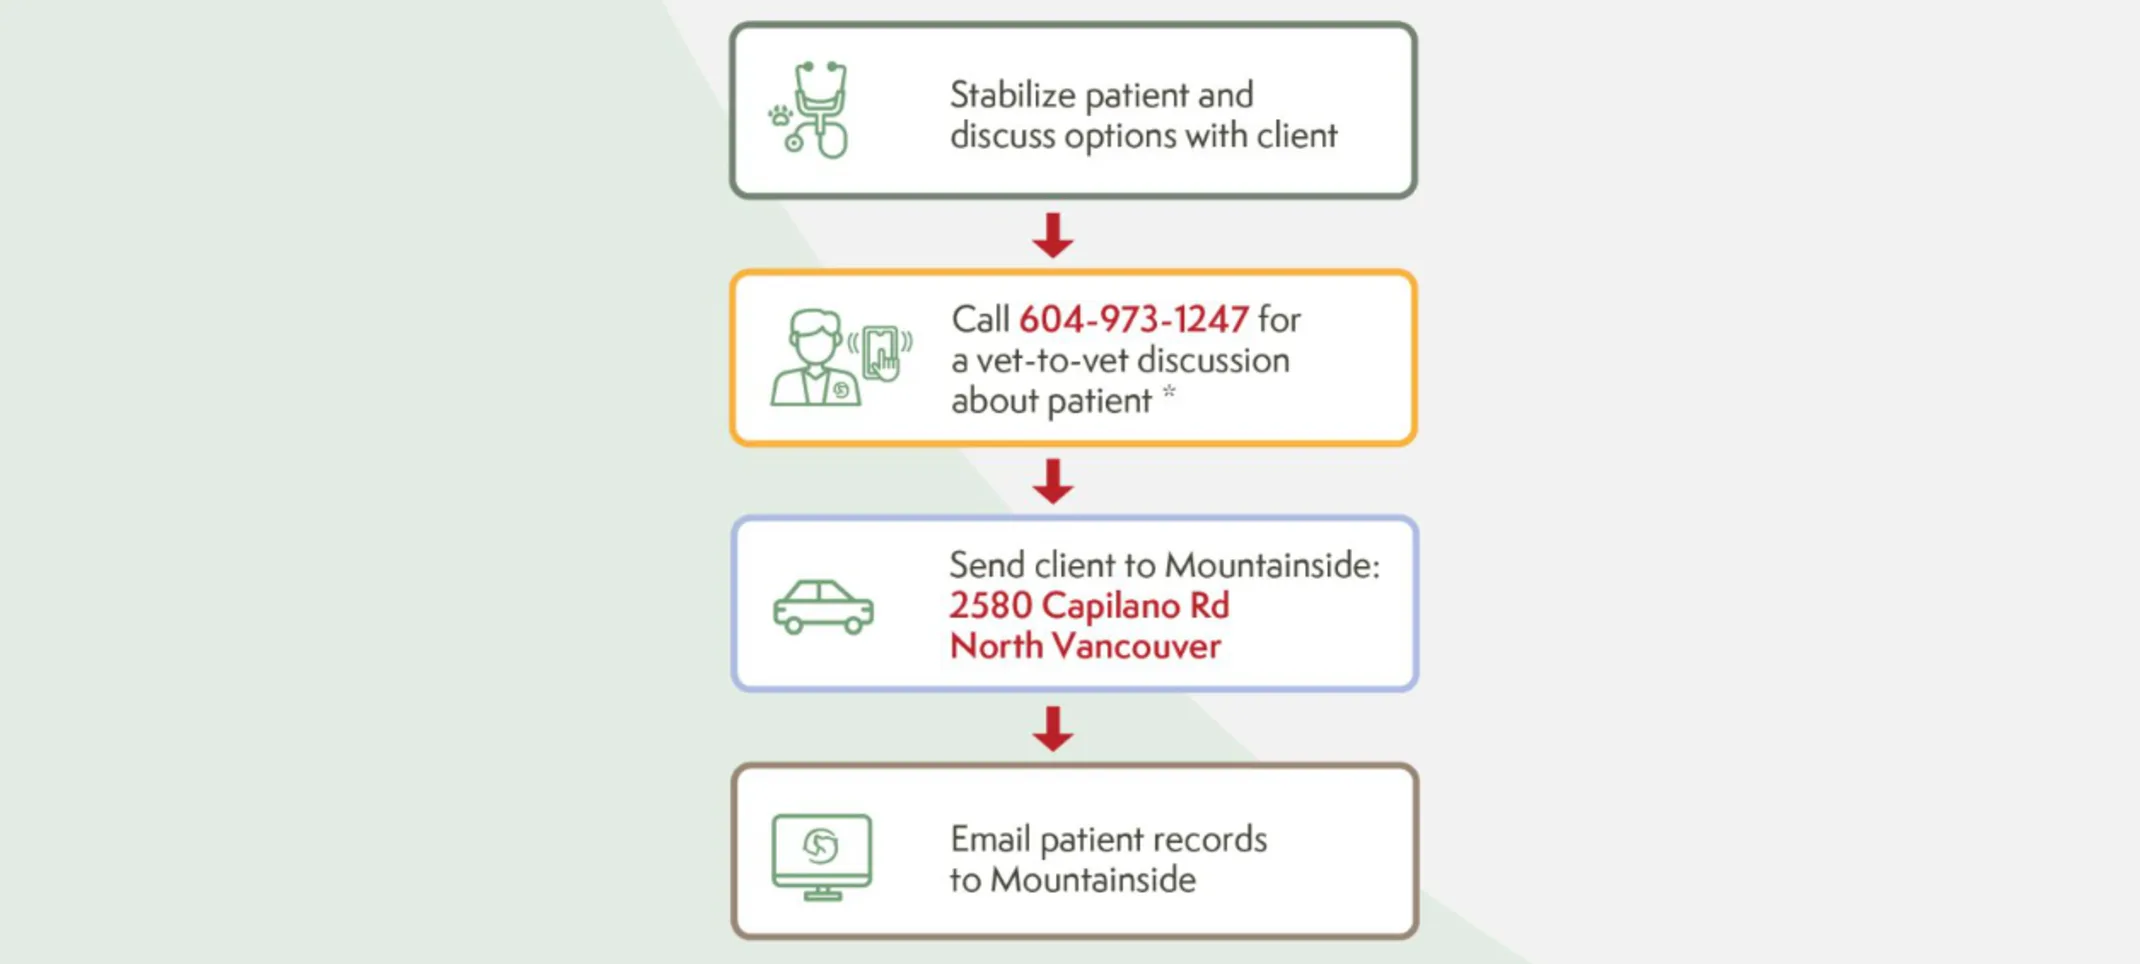 Stabilize patient and discuss options with client. Call 604-973-1247 for a vet-to-vet discussion about patient. Send client to 2580 Capilano Rd in North Vancouver. Email patient records to Mountainside 24/7 Animal Emergency.